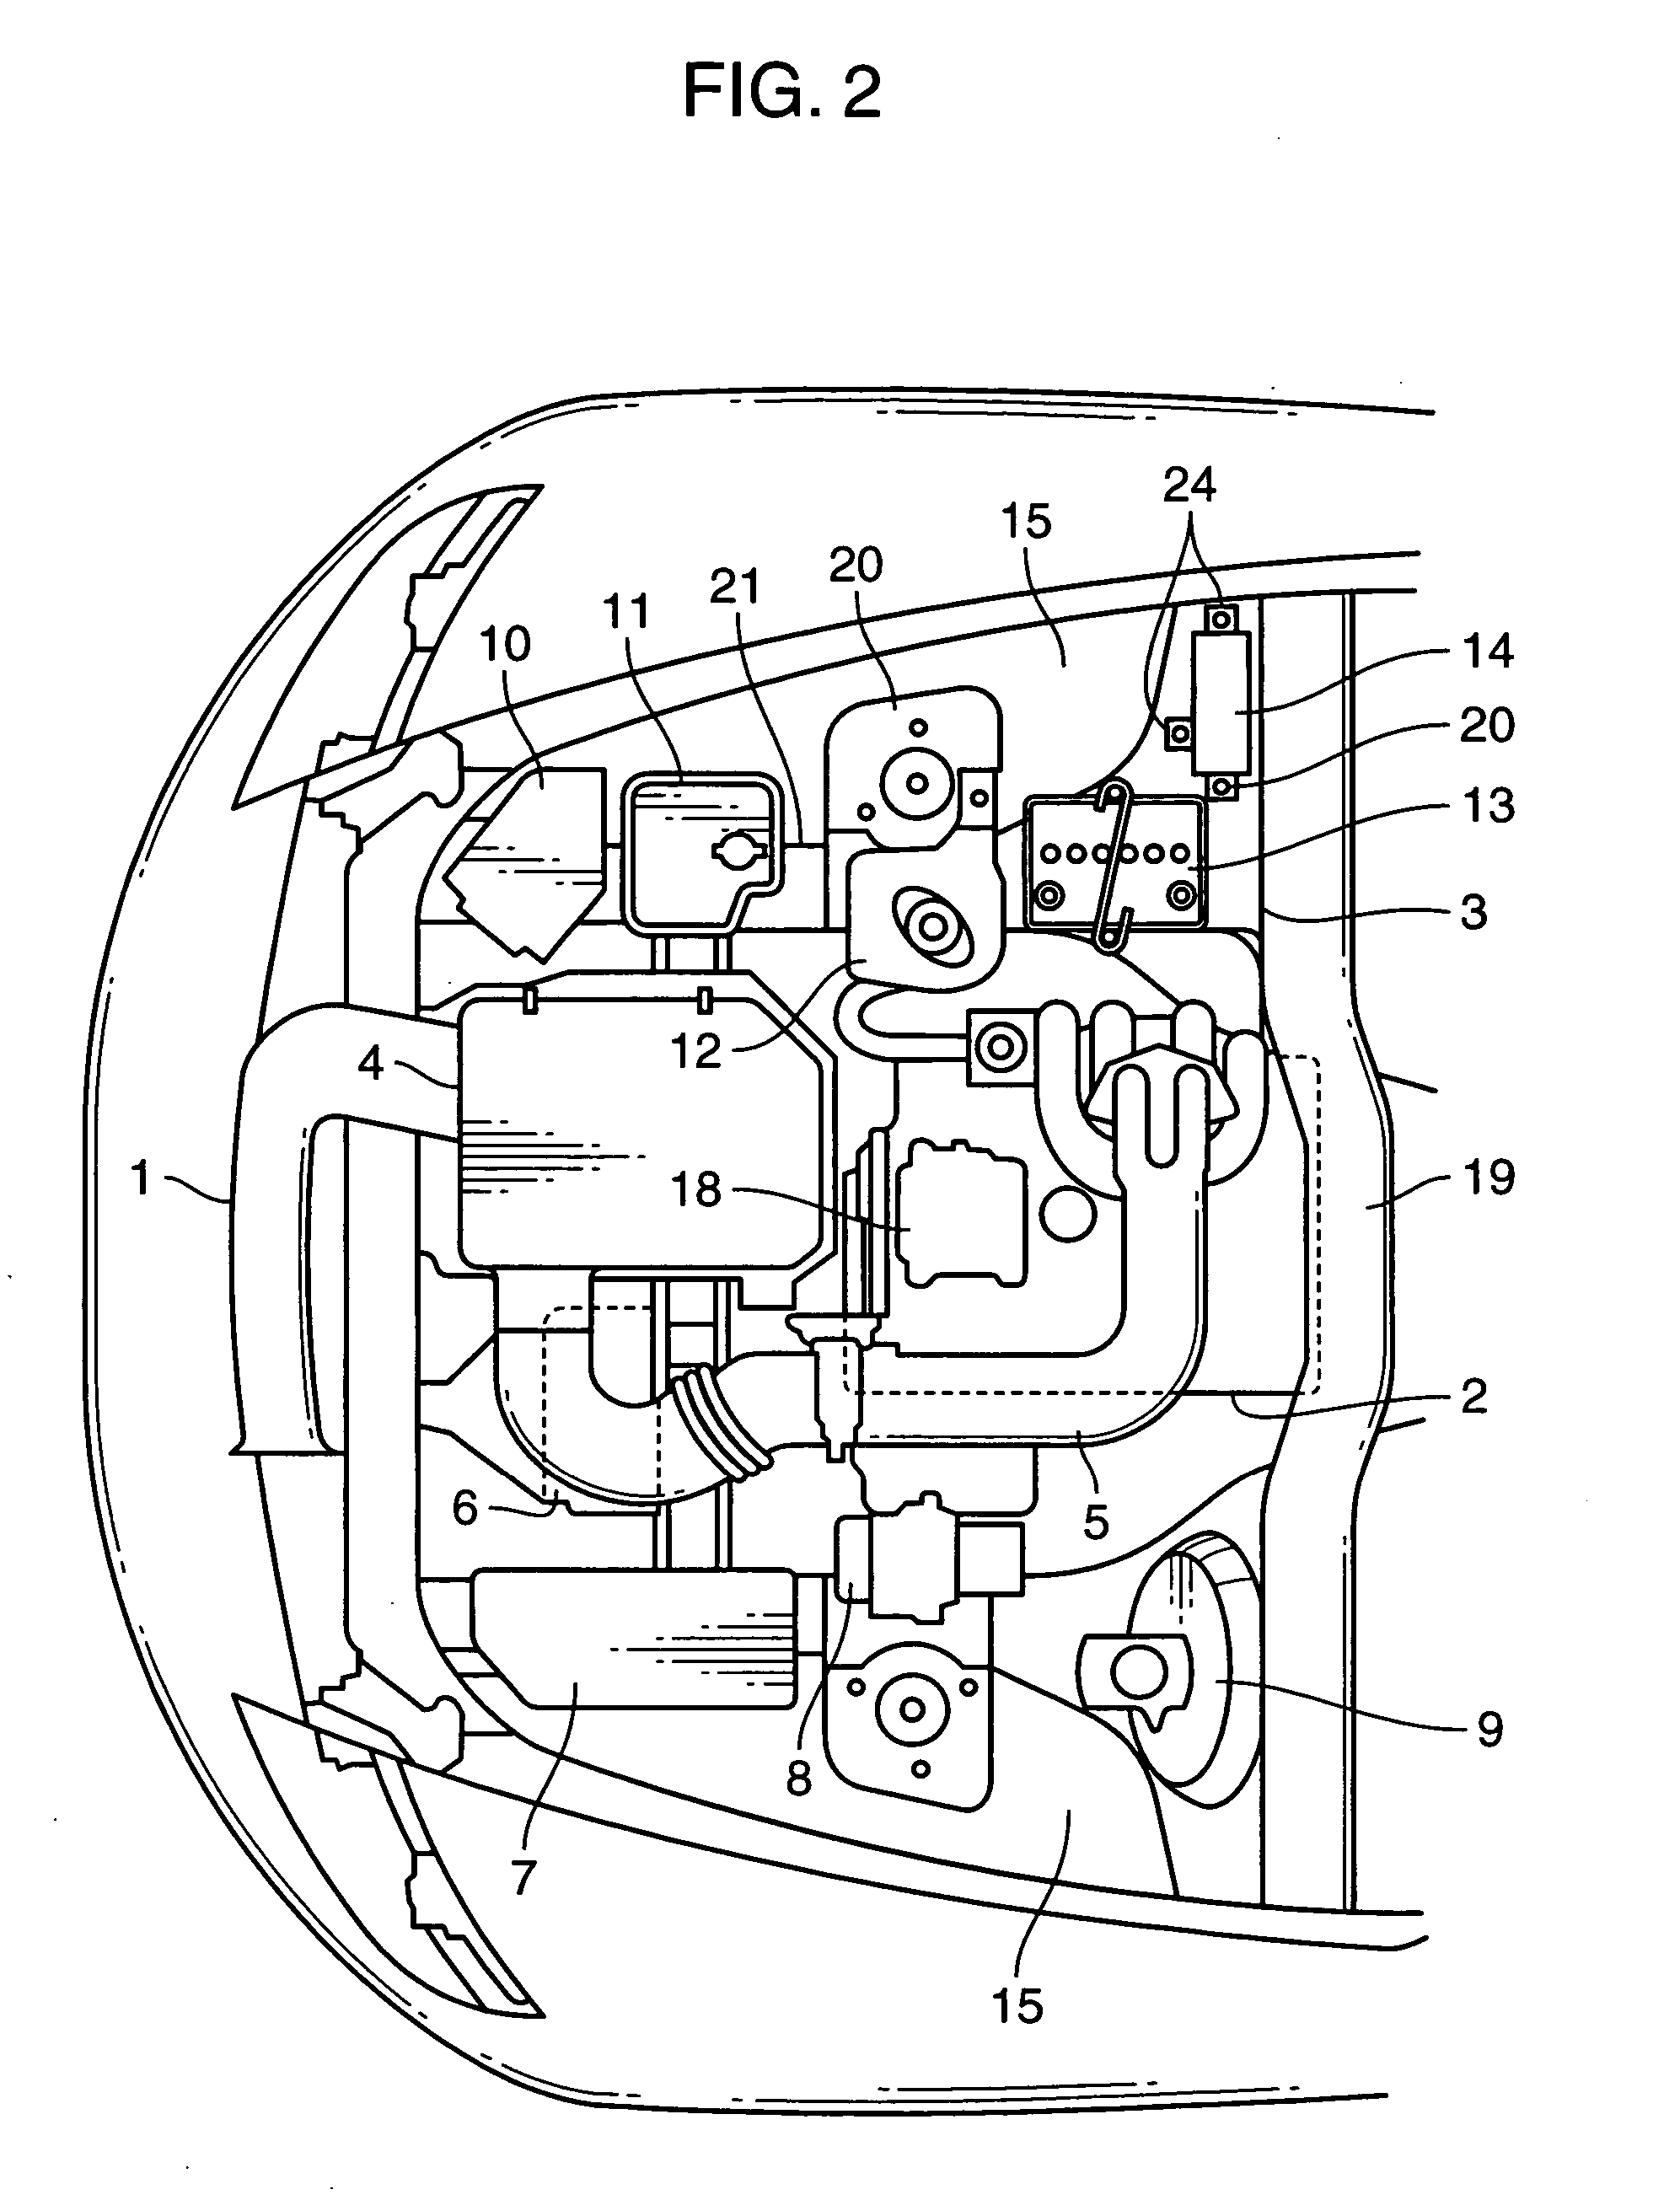 Structure for arrangement of engine-associated vehicle components